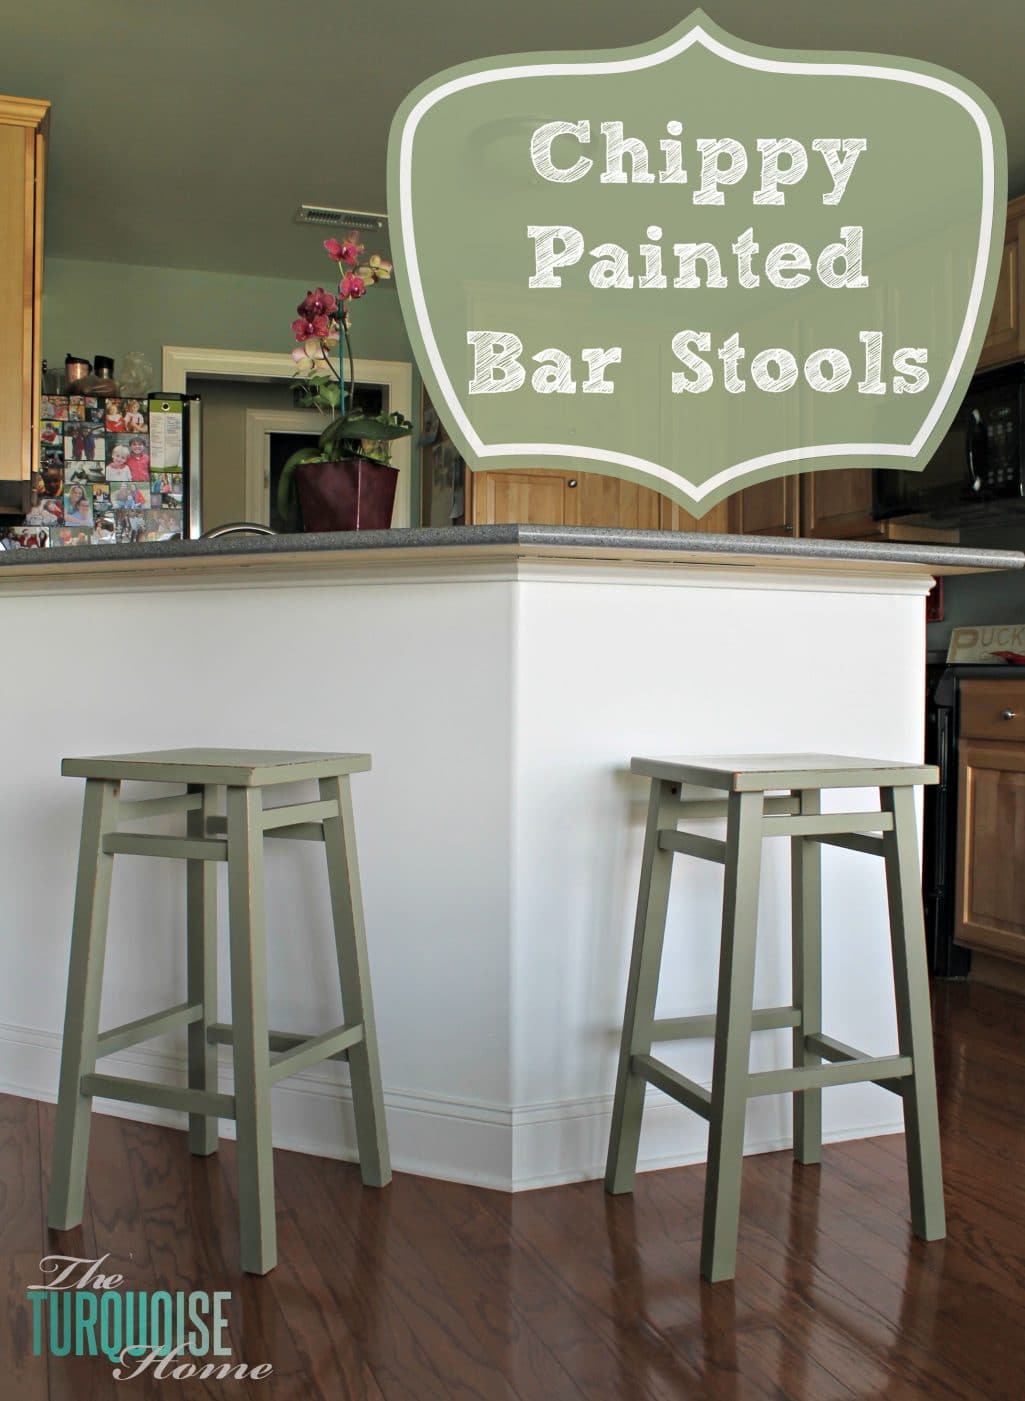 Chippy Painted Bar Stools